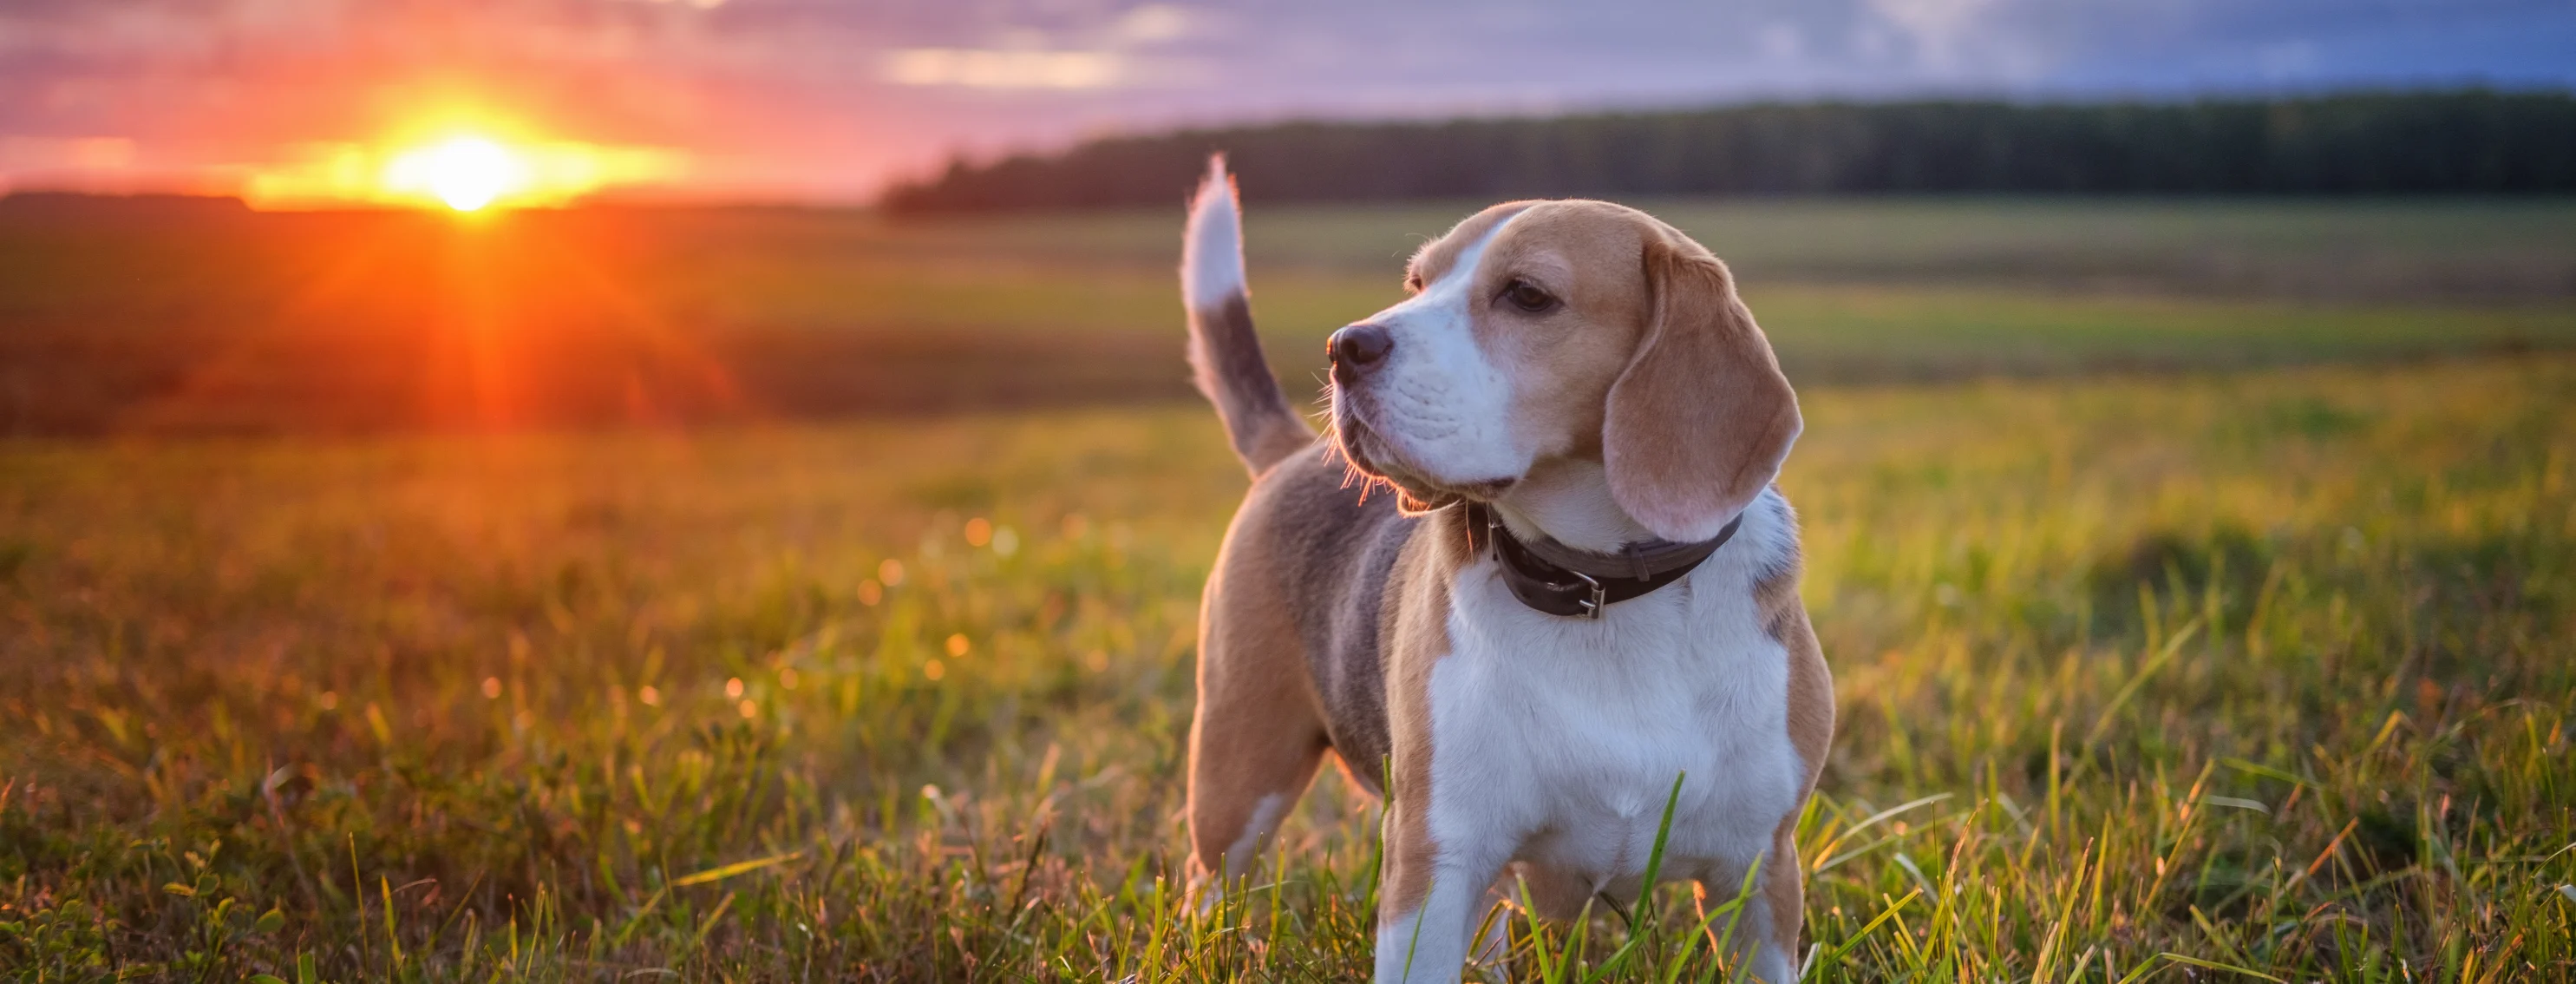 dog standing in a field with sunset in background